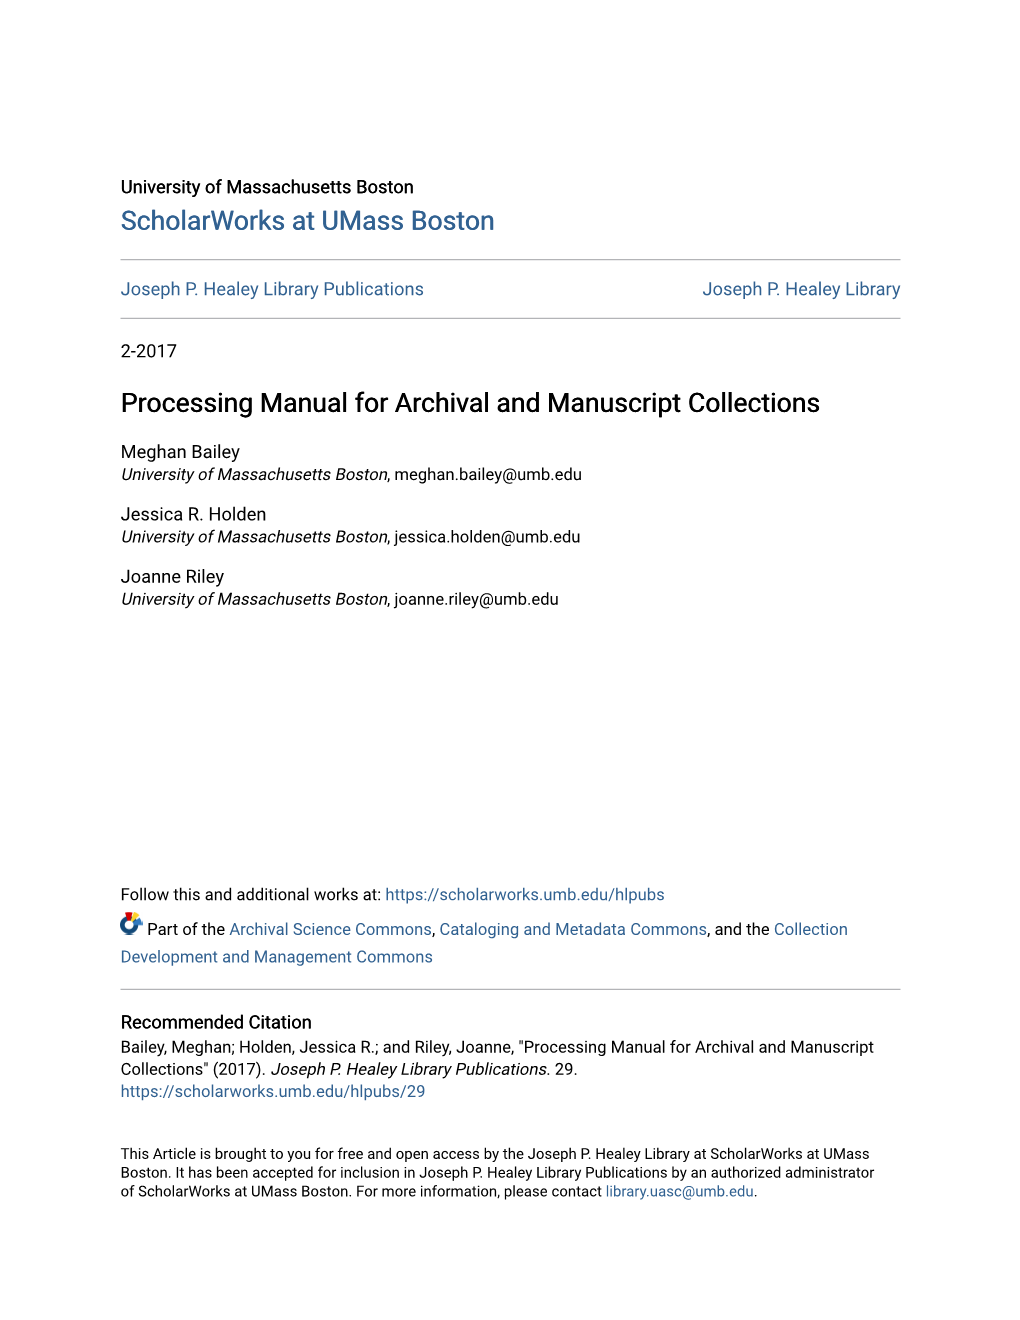 Processing Manual for Archival and Manuscript Collections